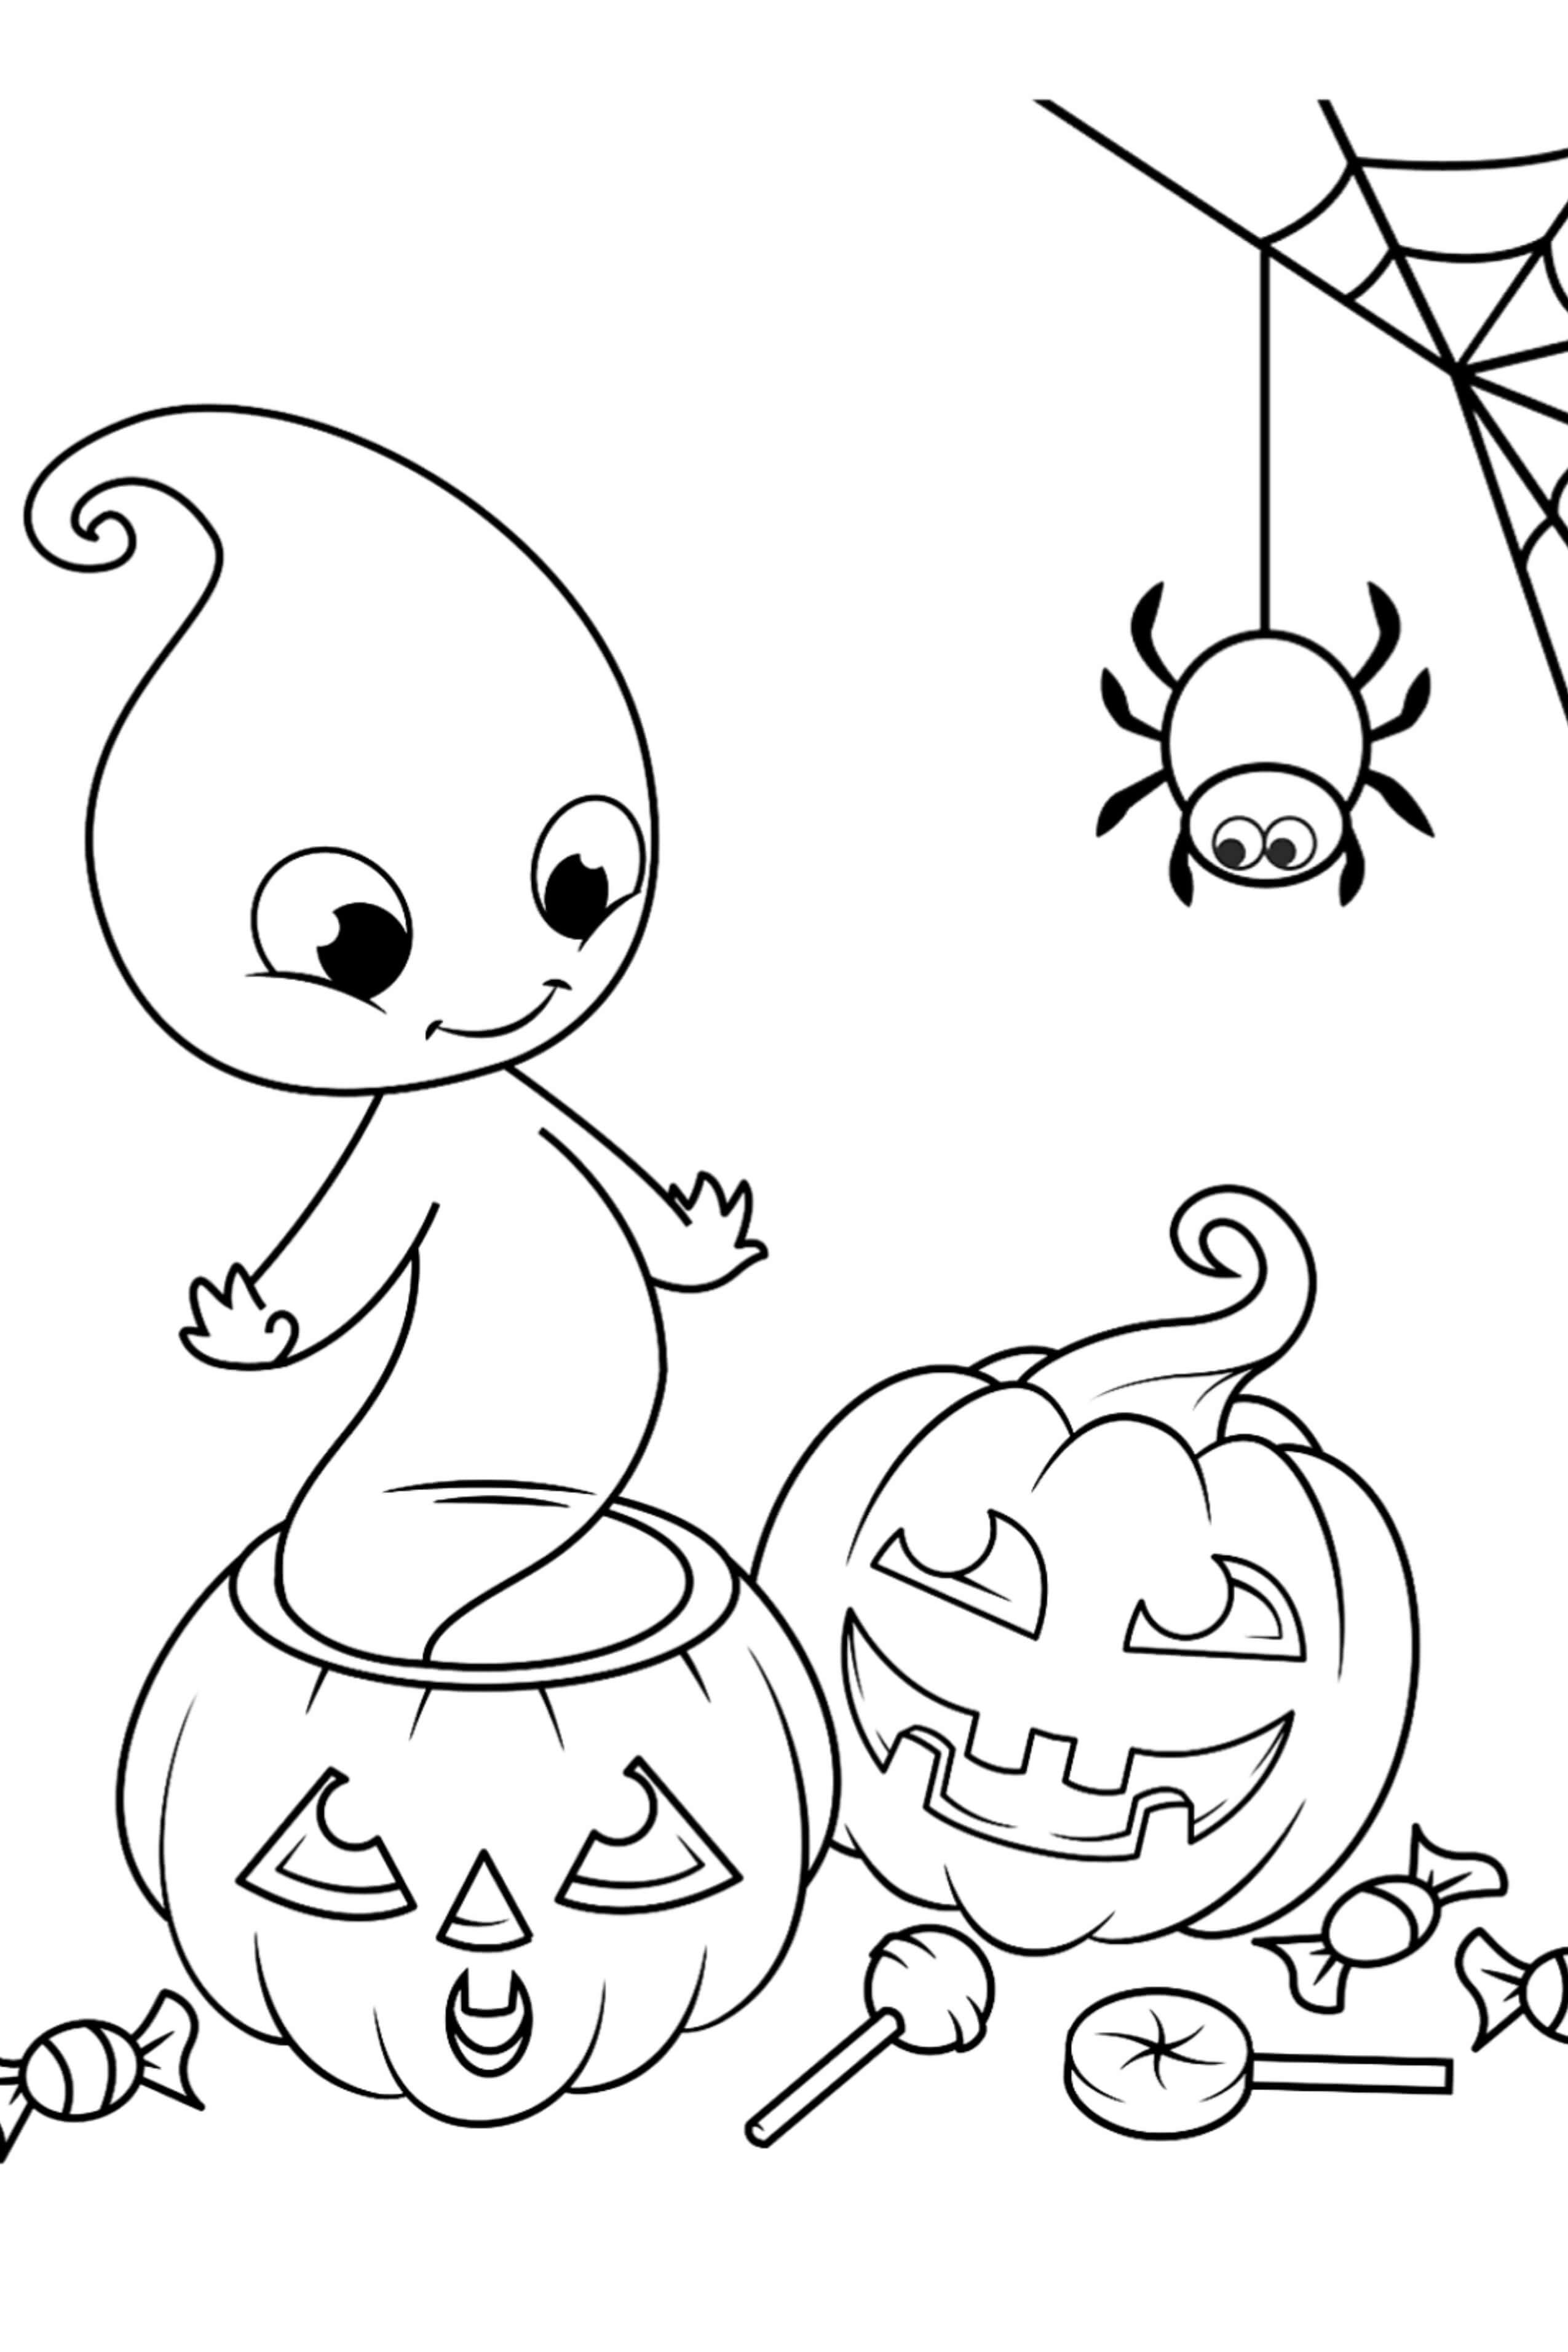 halloween coloring page easy